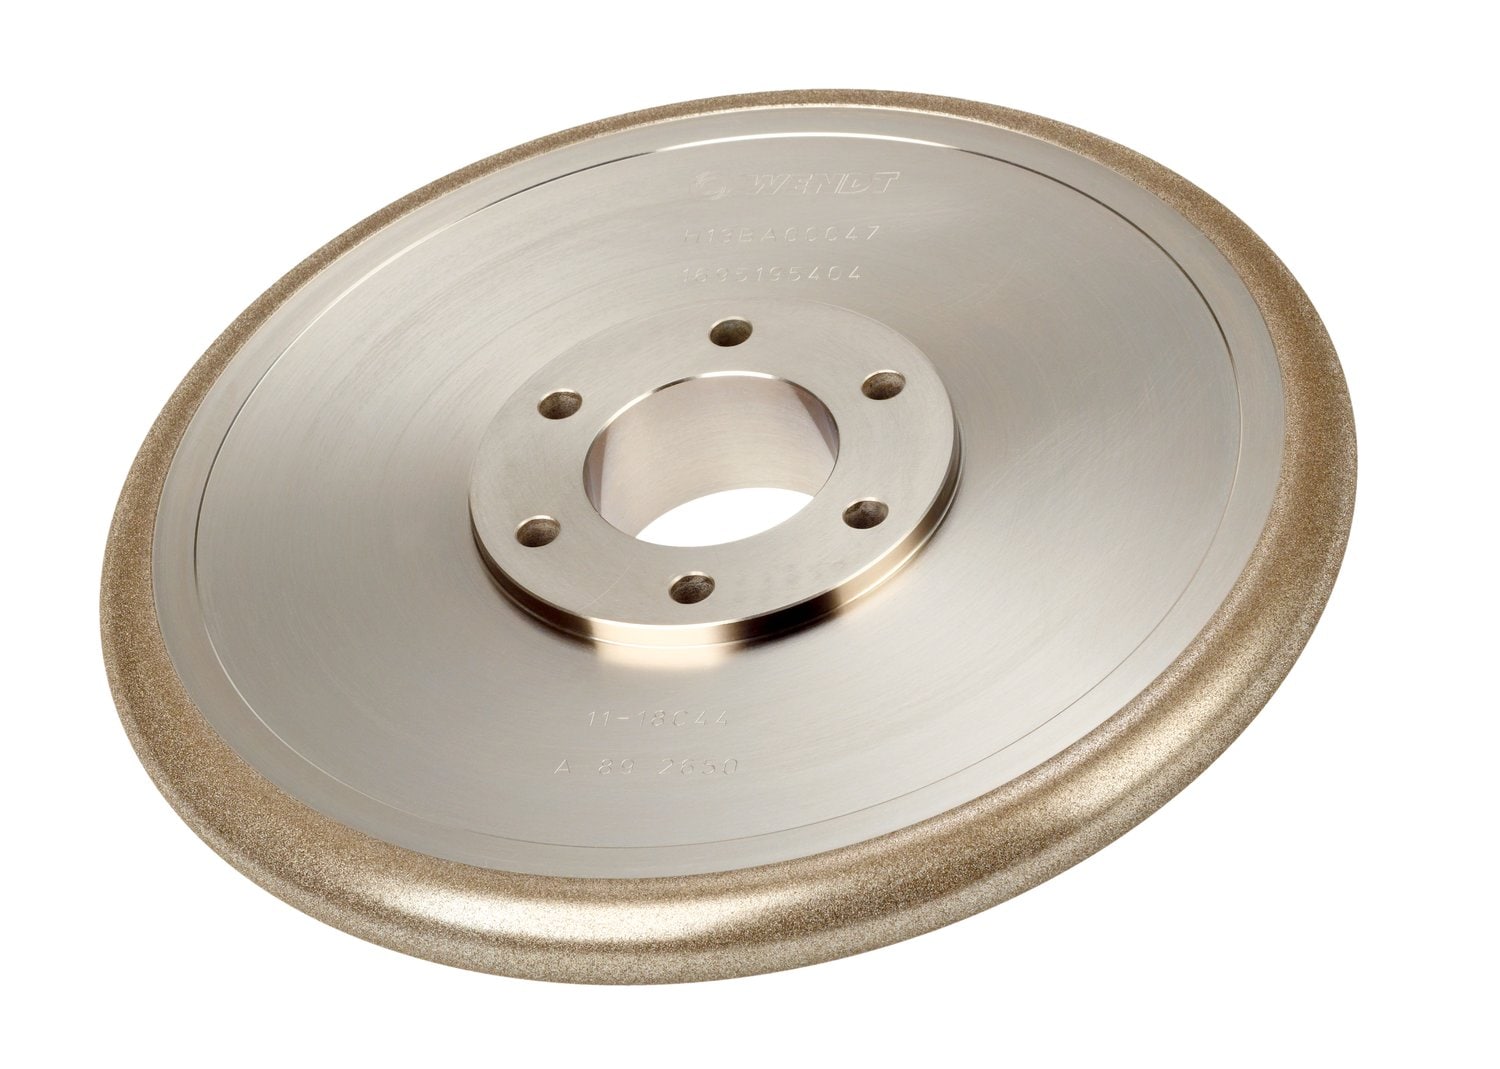 7010497621 - 3M Electroplated CBN Wheels and Tools, Plated Wheel, DWG#2476949 4-1/2x1/2x1-1/4, D200 Grit - MMMF42533